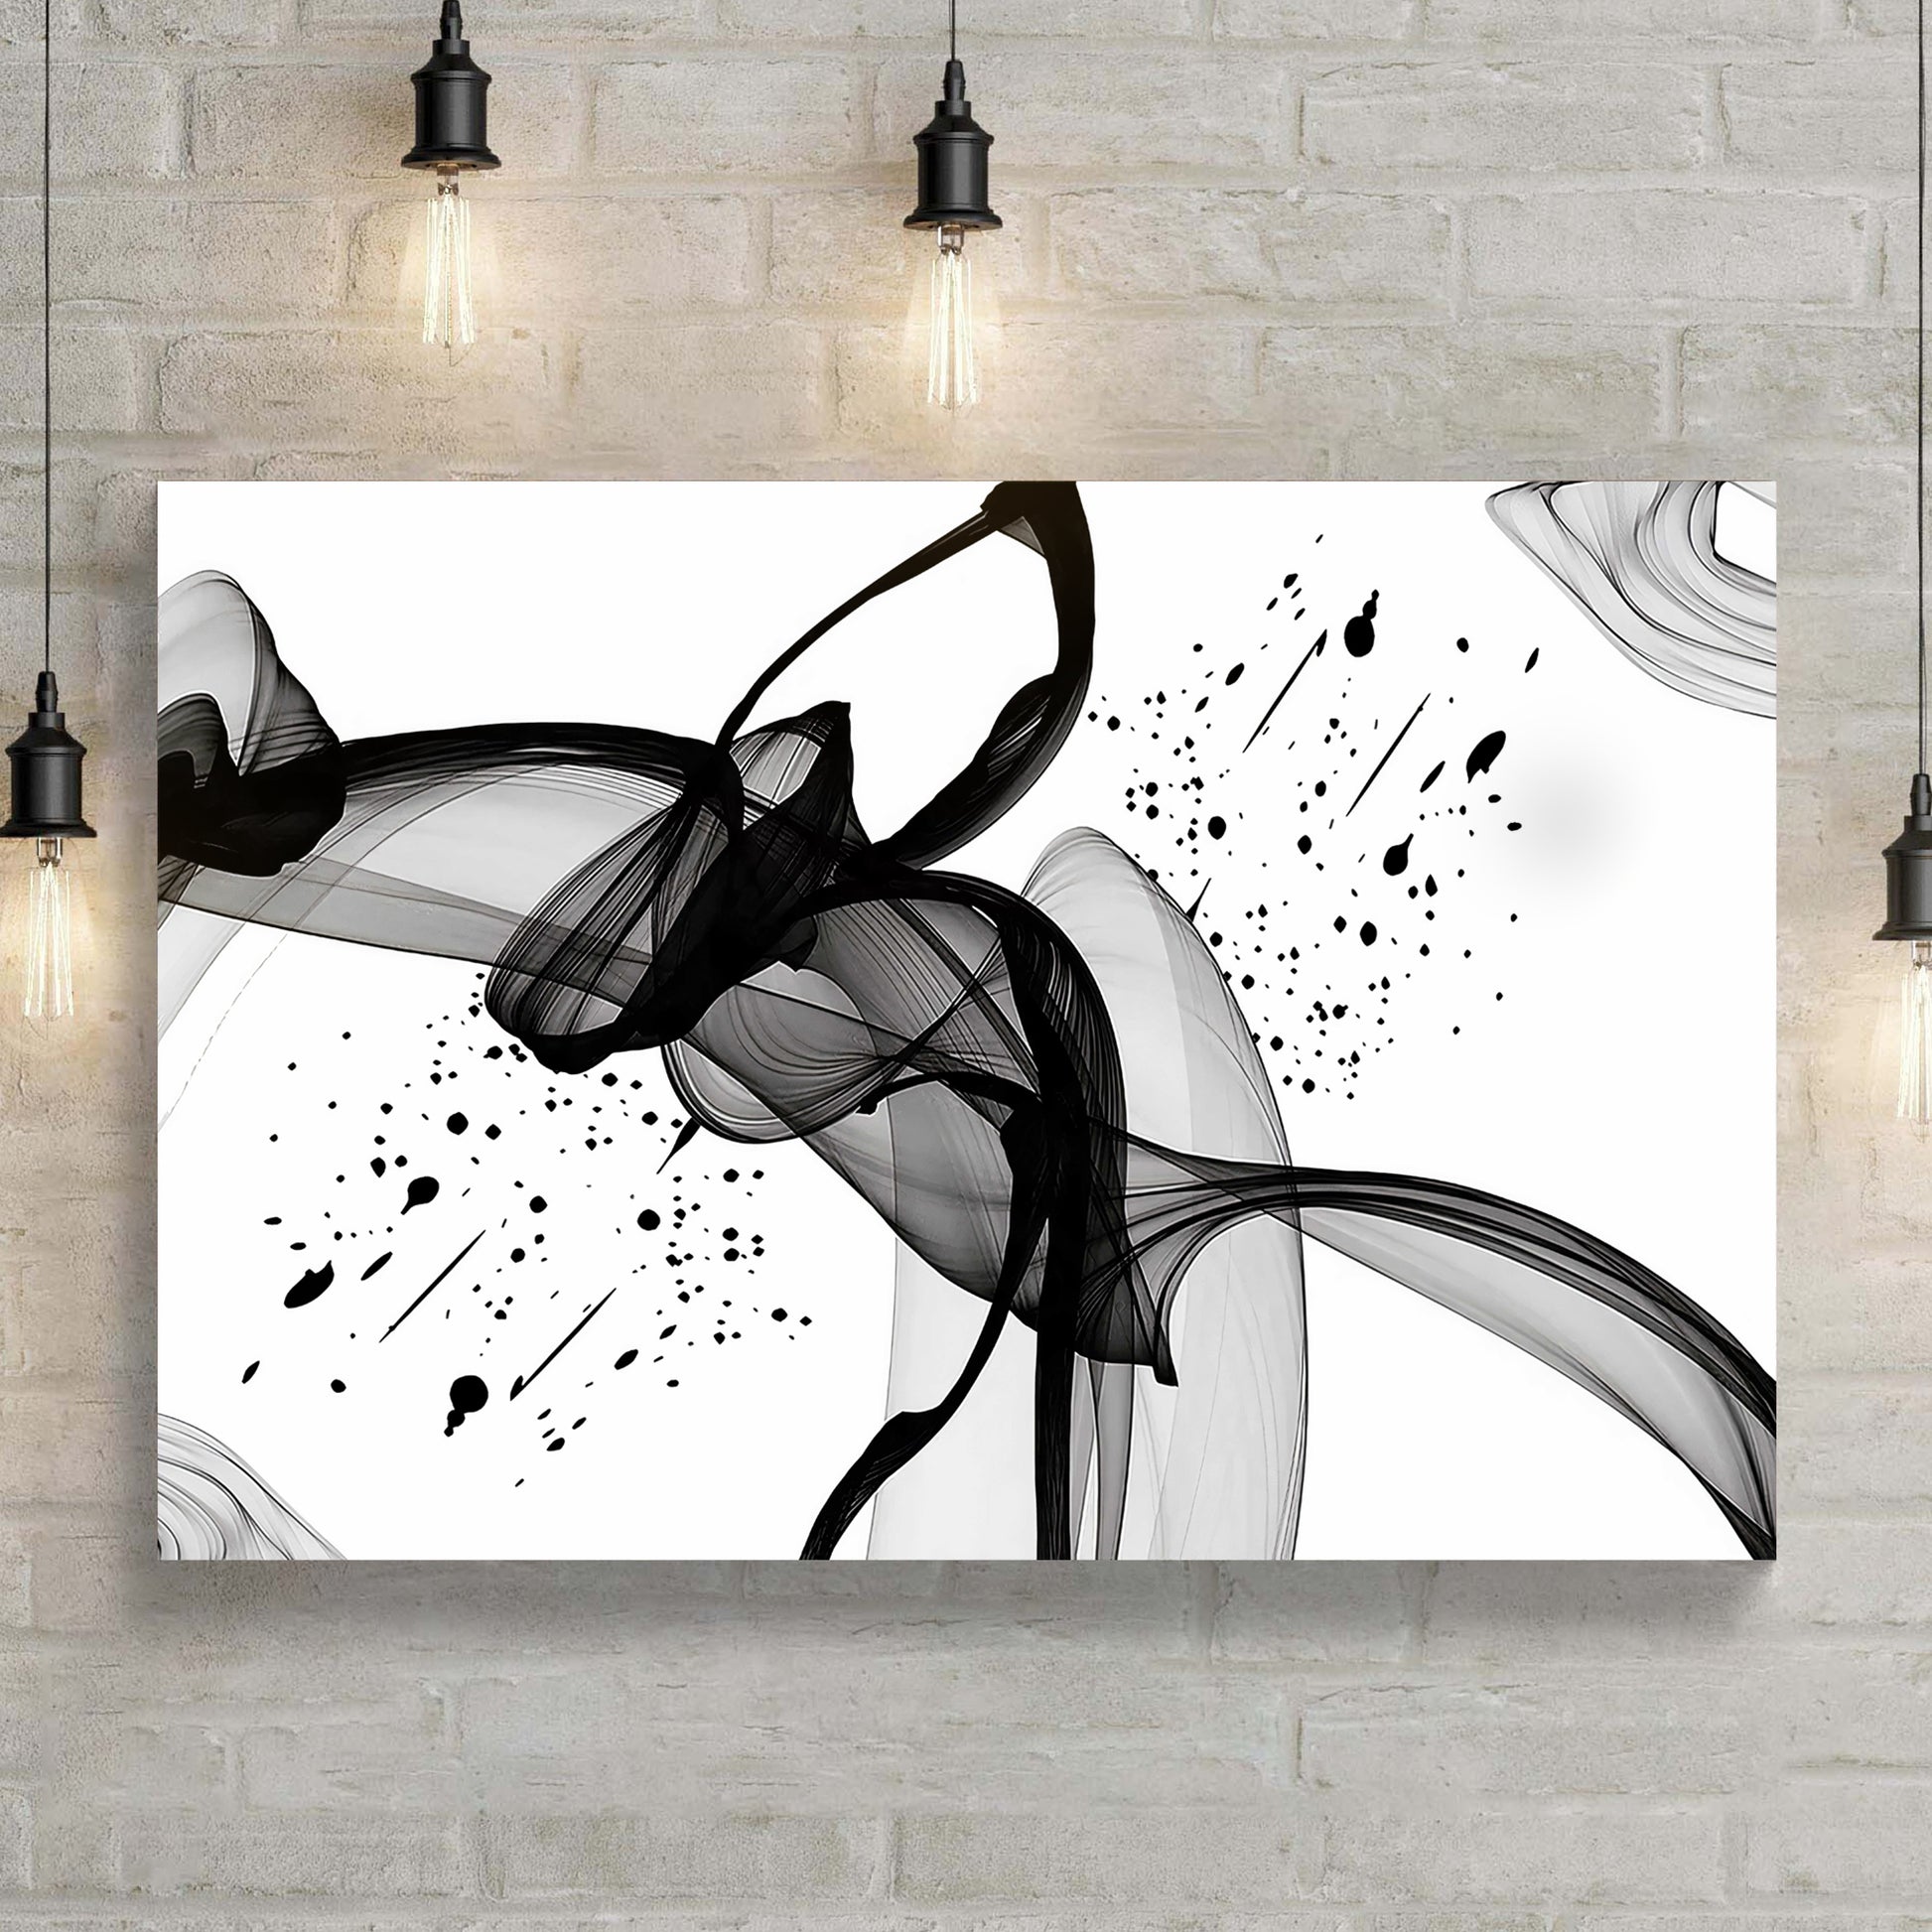 Minimalist Black Abstract Canvas Wall Art - Image by Tailored Canvases